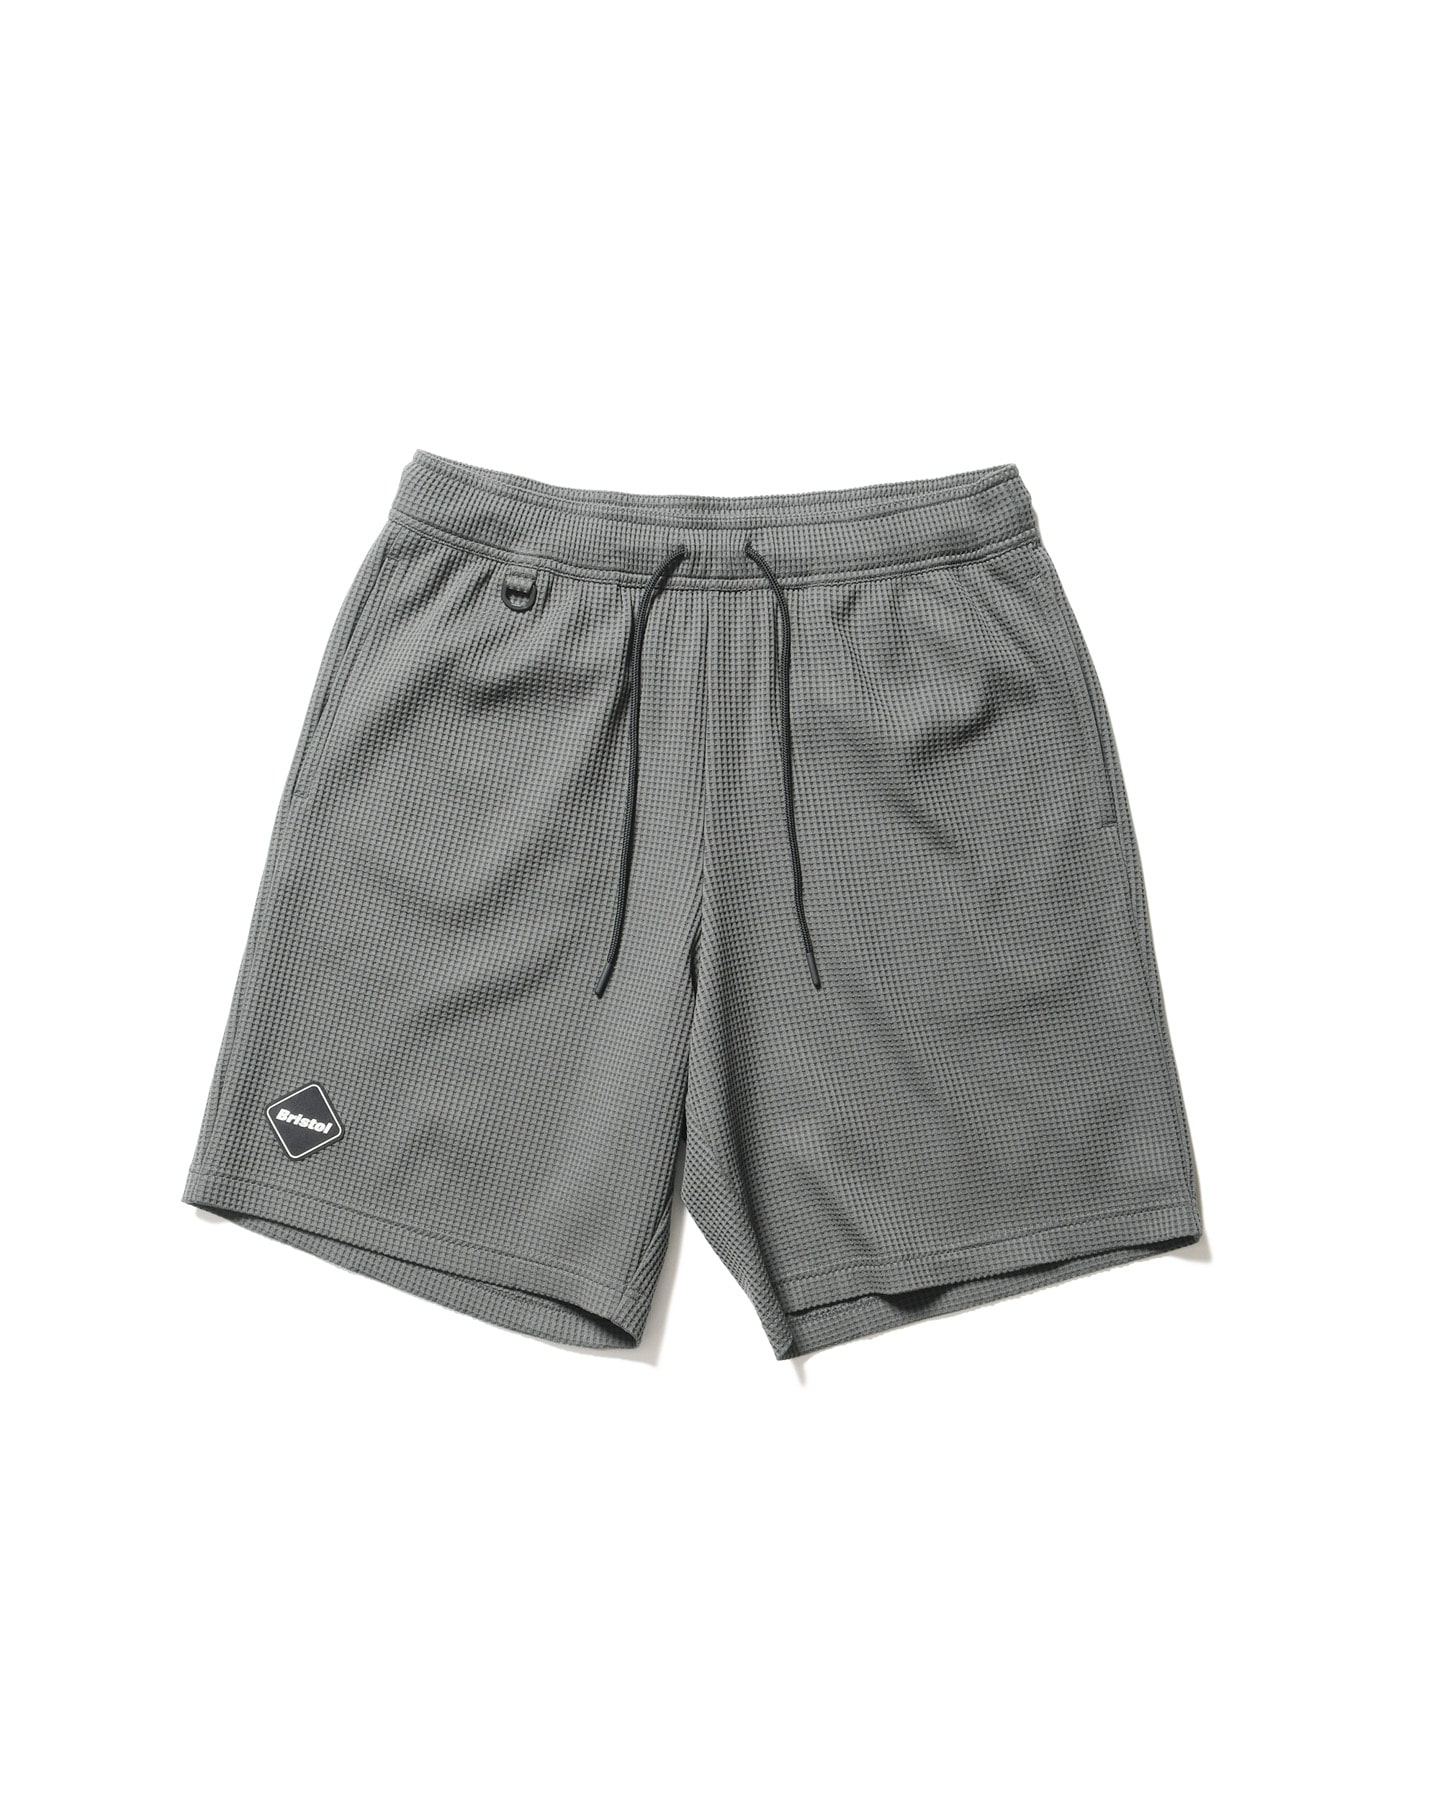 SOPH. | TECH WAFFLE TEAM RELAX SHORTS(M CHARCOAL GRAY):